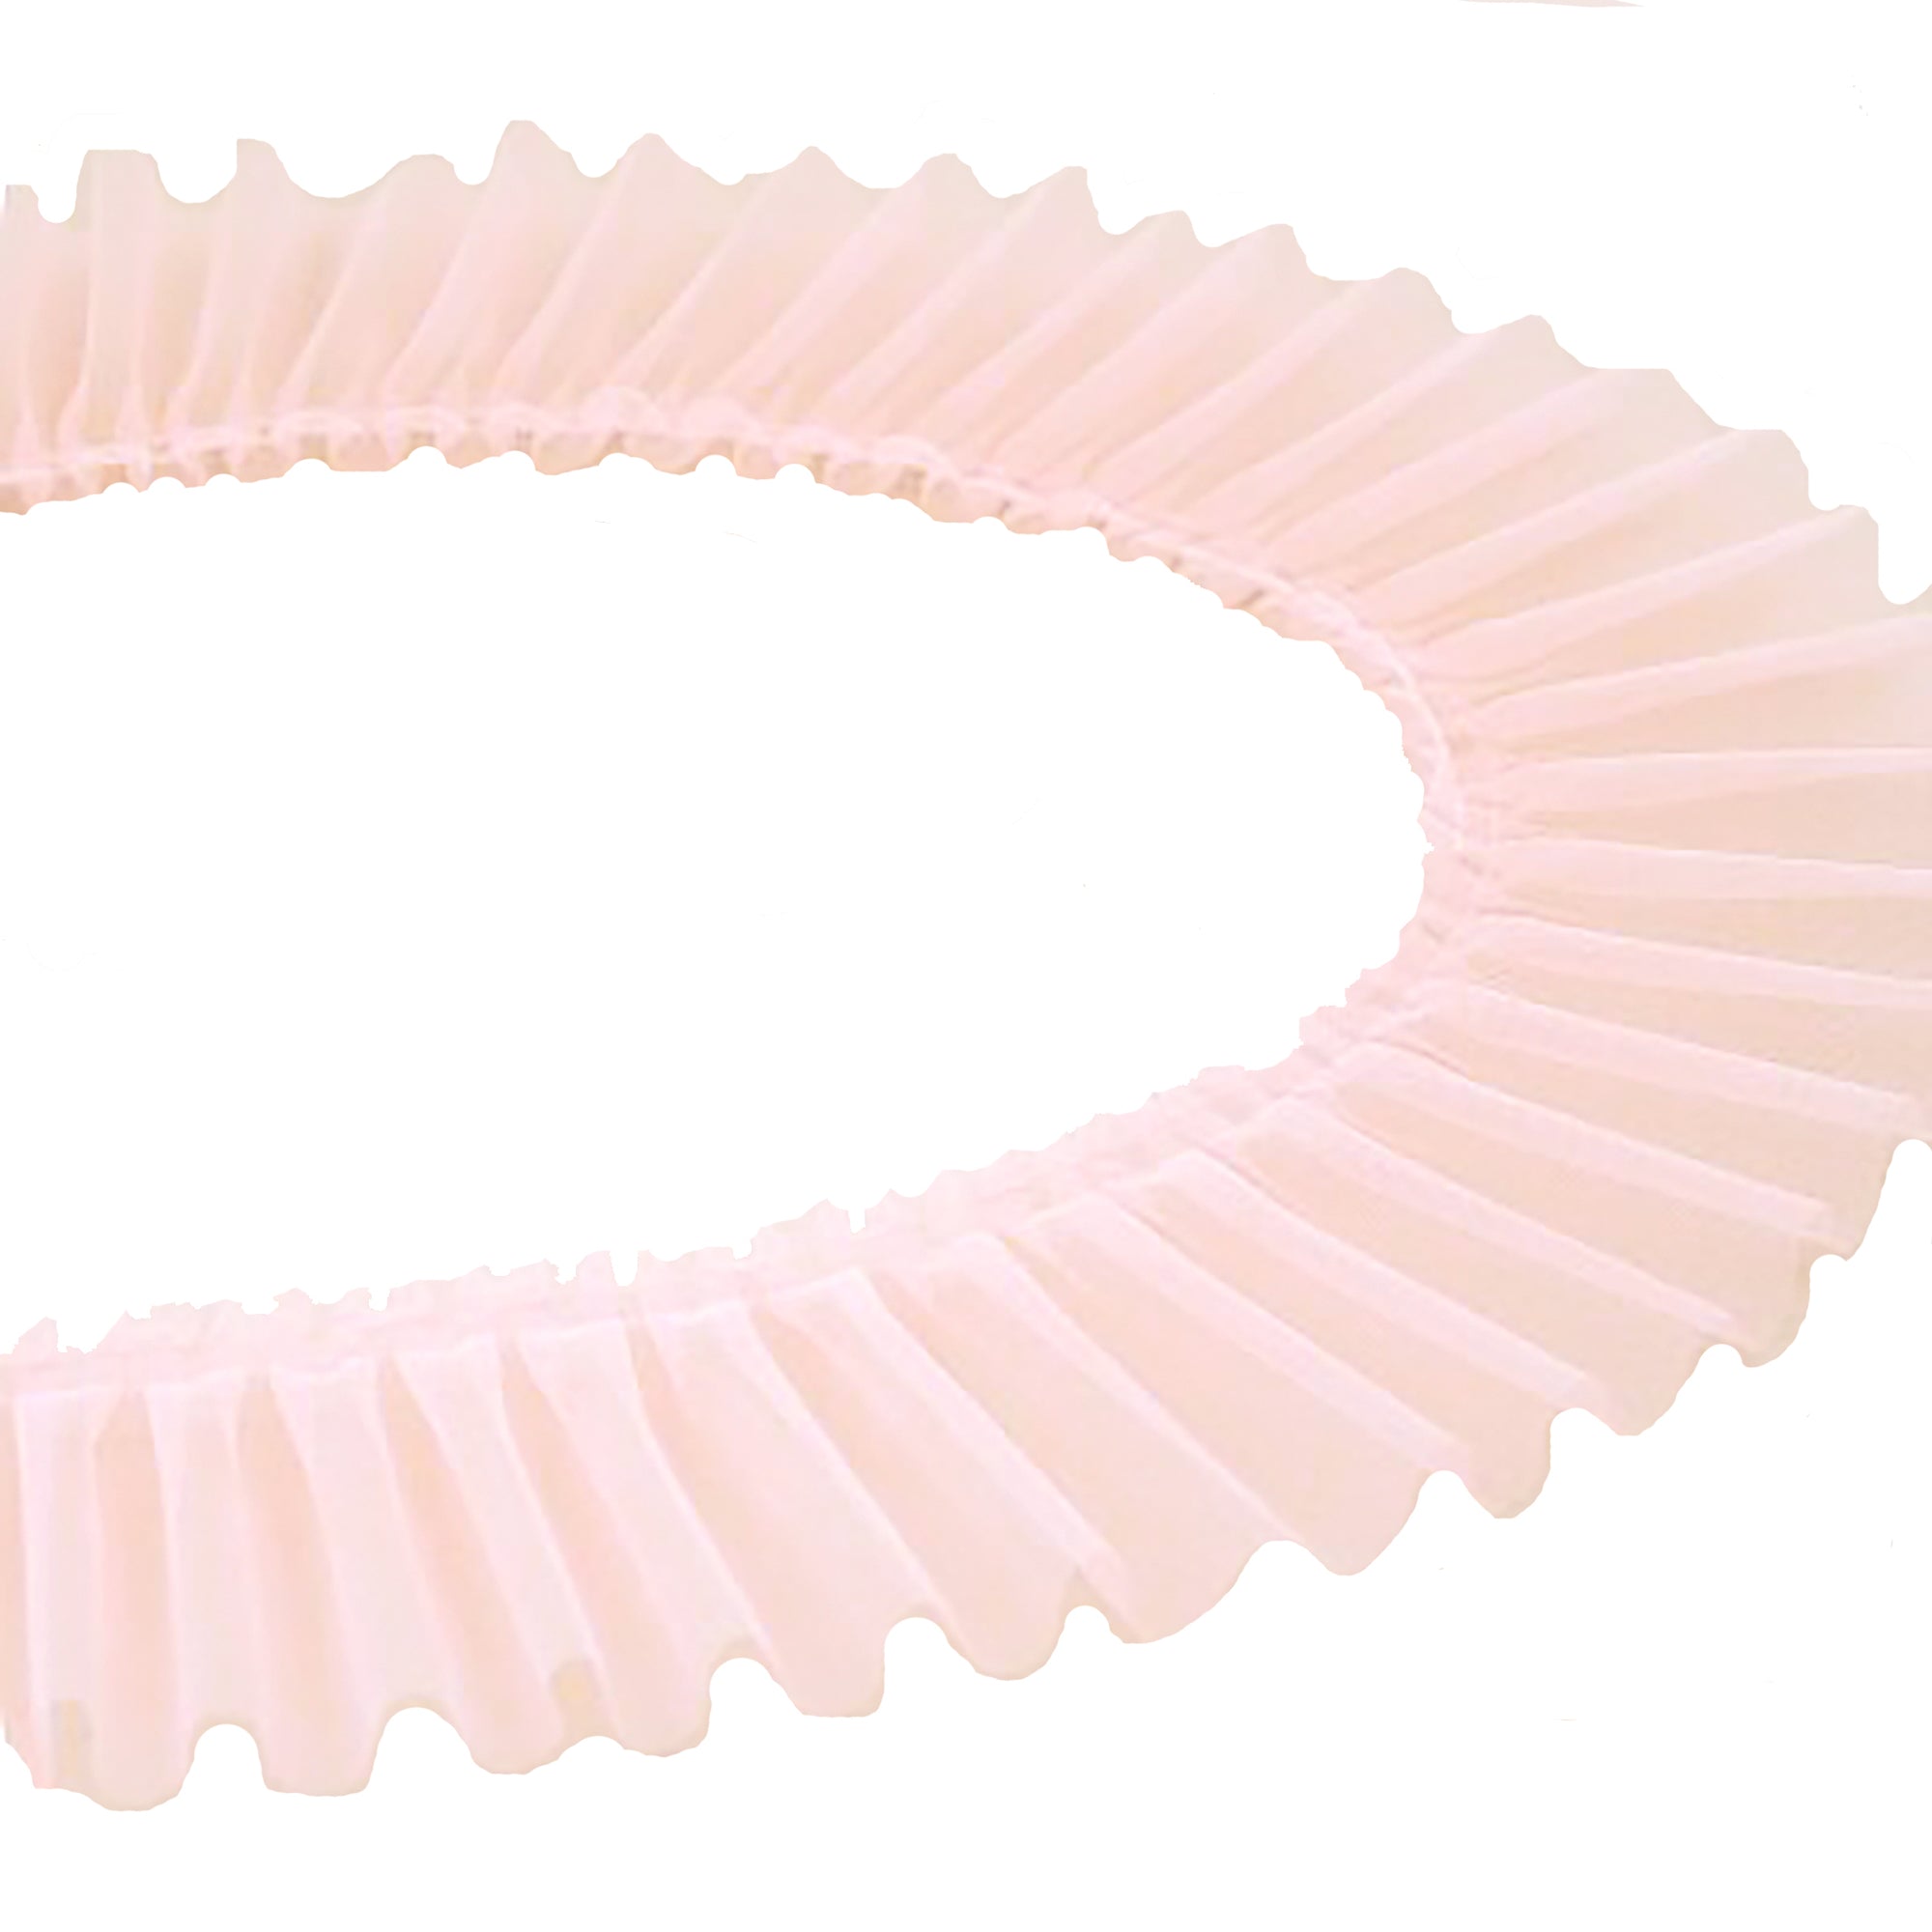 Ruffle Trim (Sold by the Yard) - Trims By The Yard